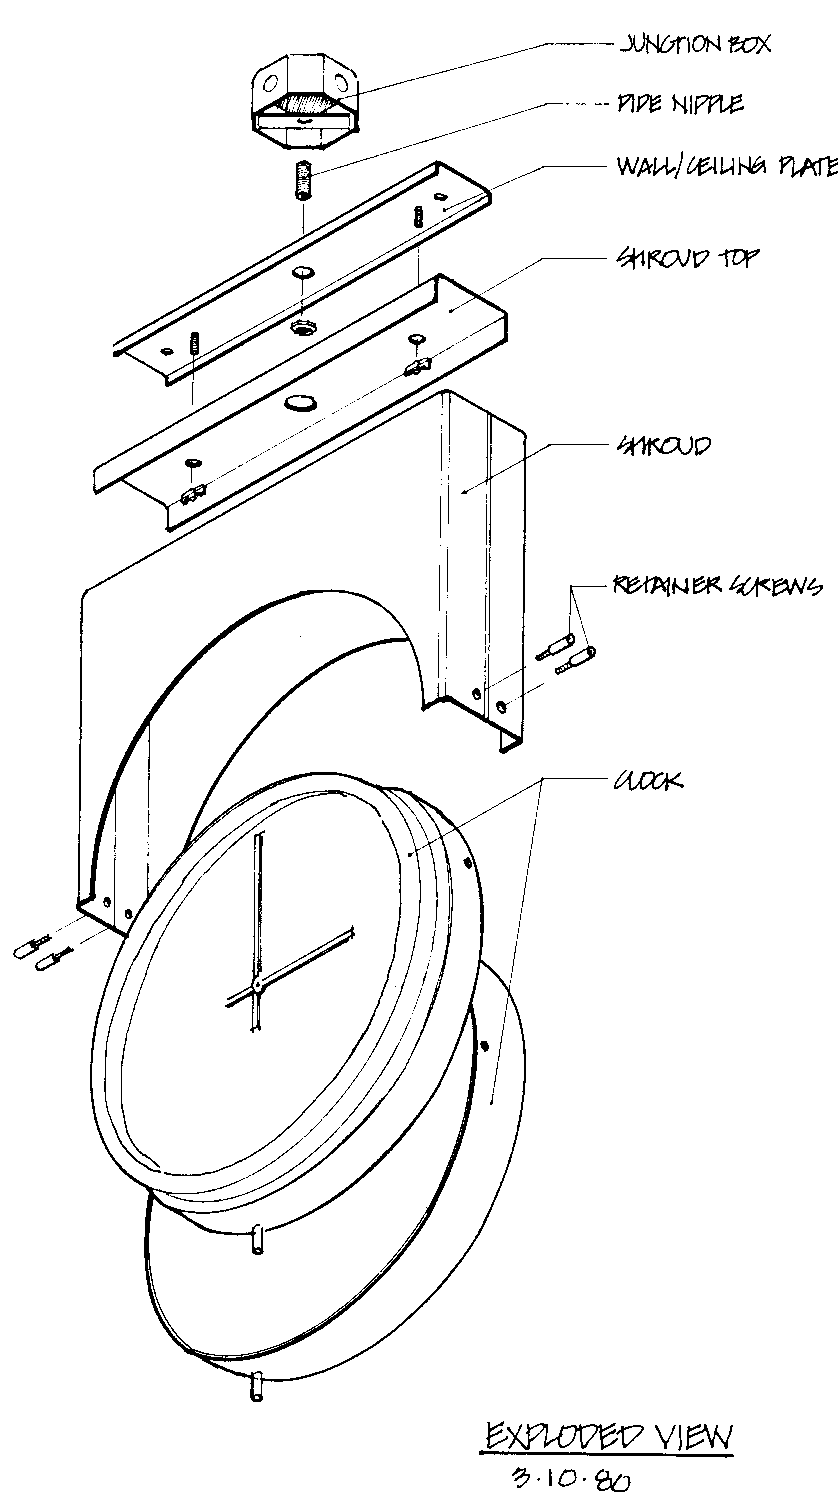 Exploded view drawing of isometric clock parts mounted to a wall or cieling